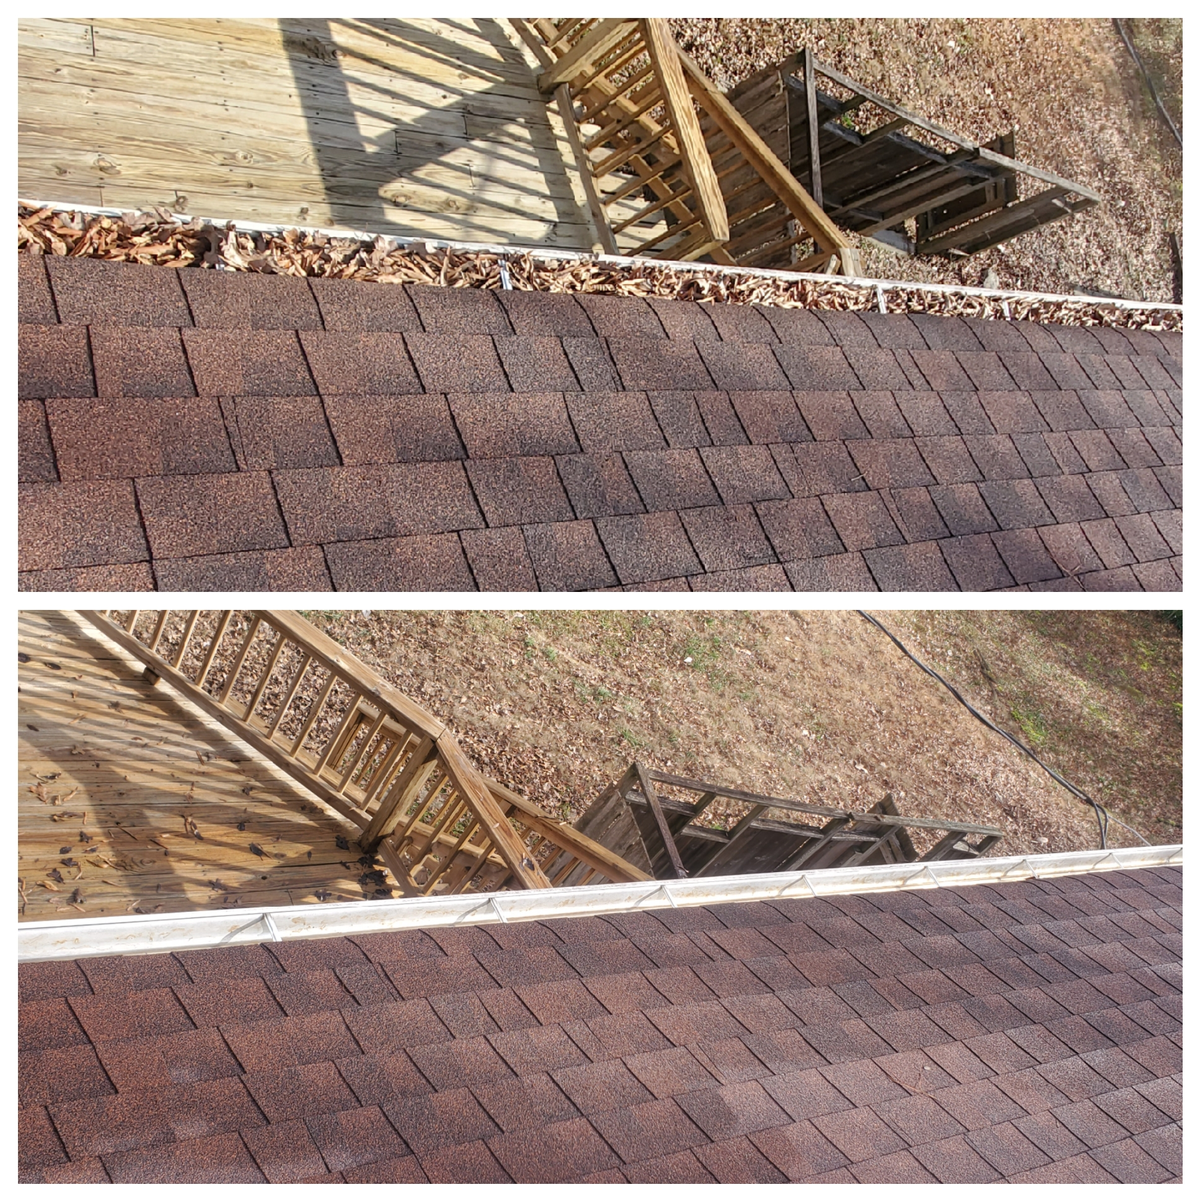 Gutter Cleaning for Shoals Pressure Washing in North Alabama, 